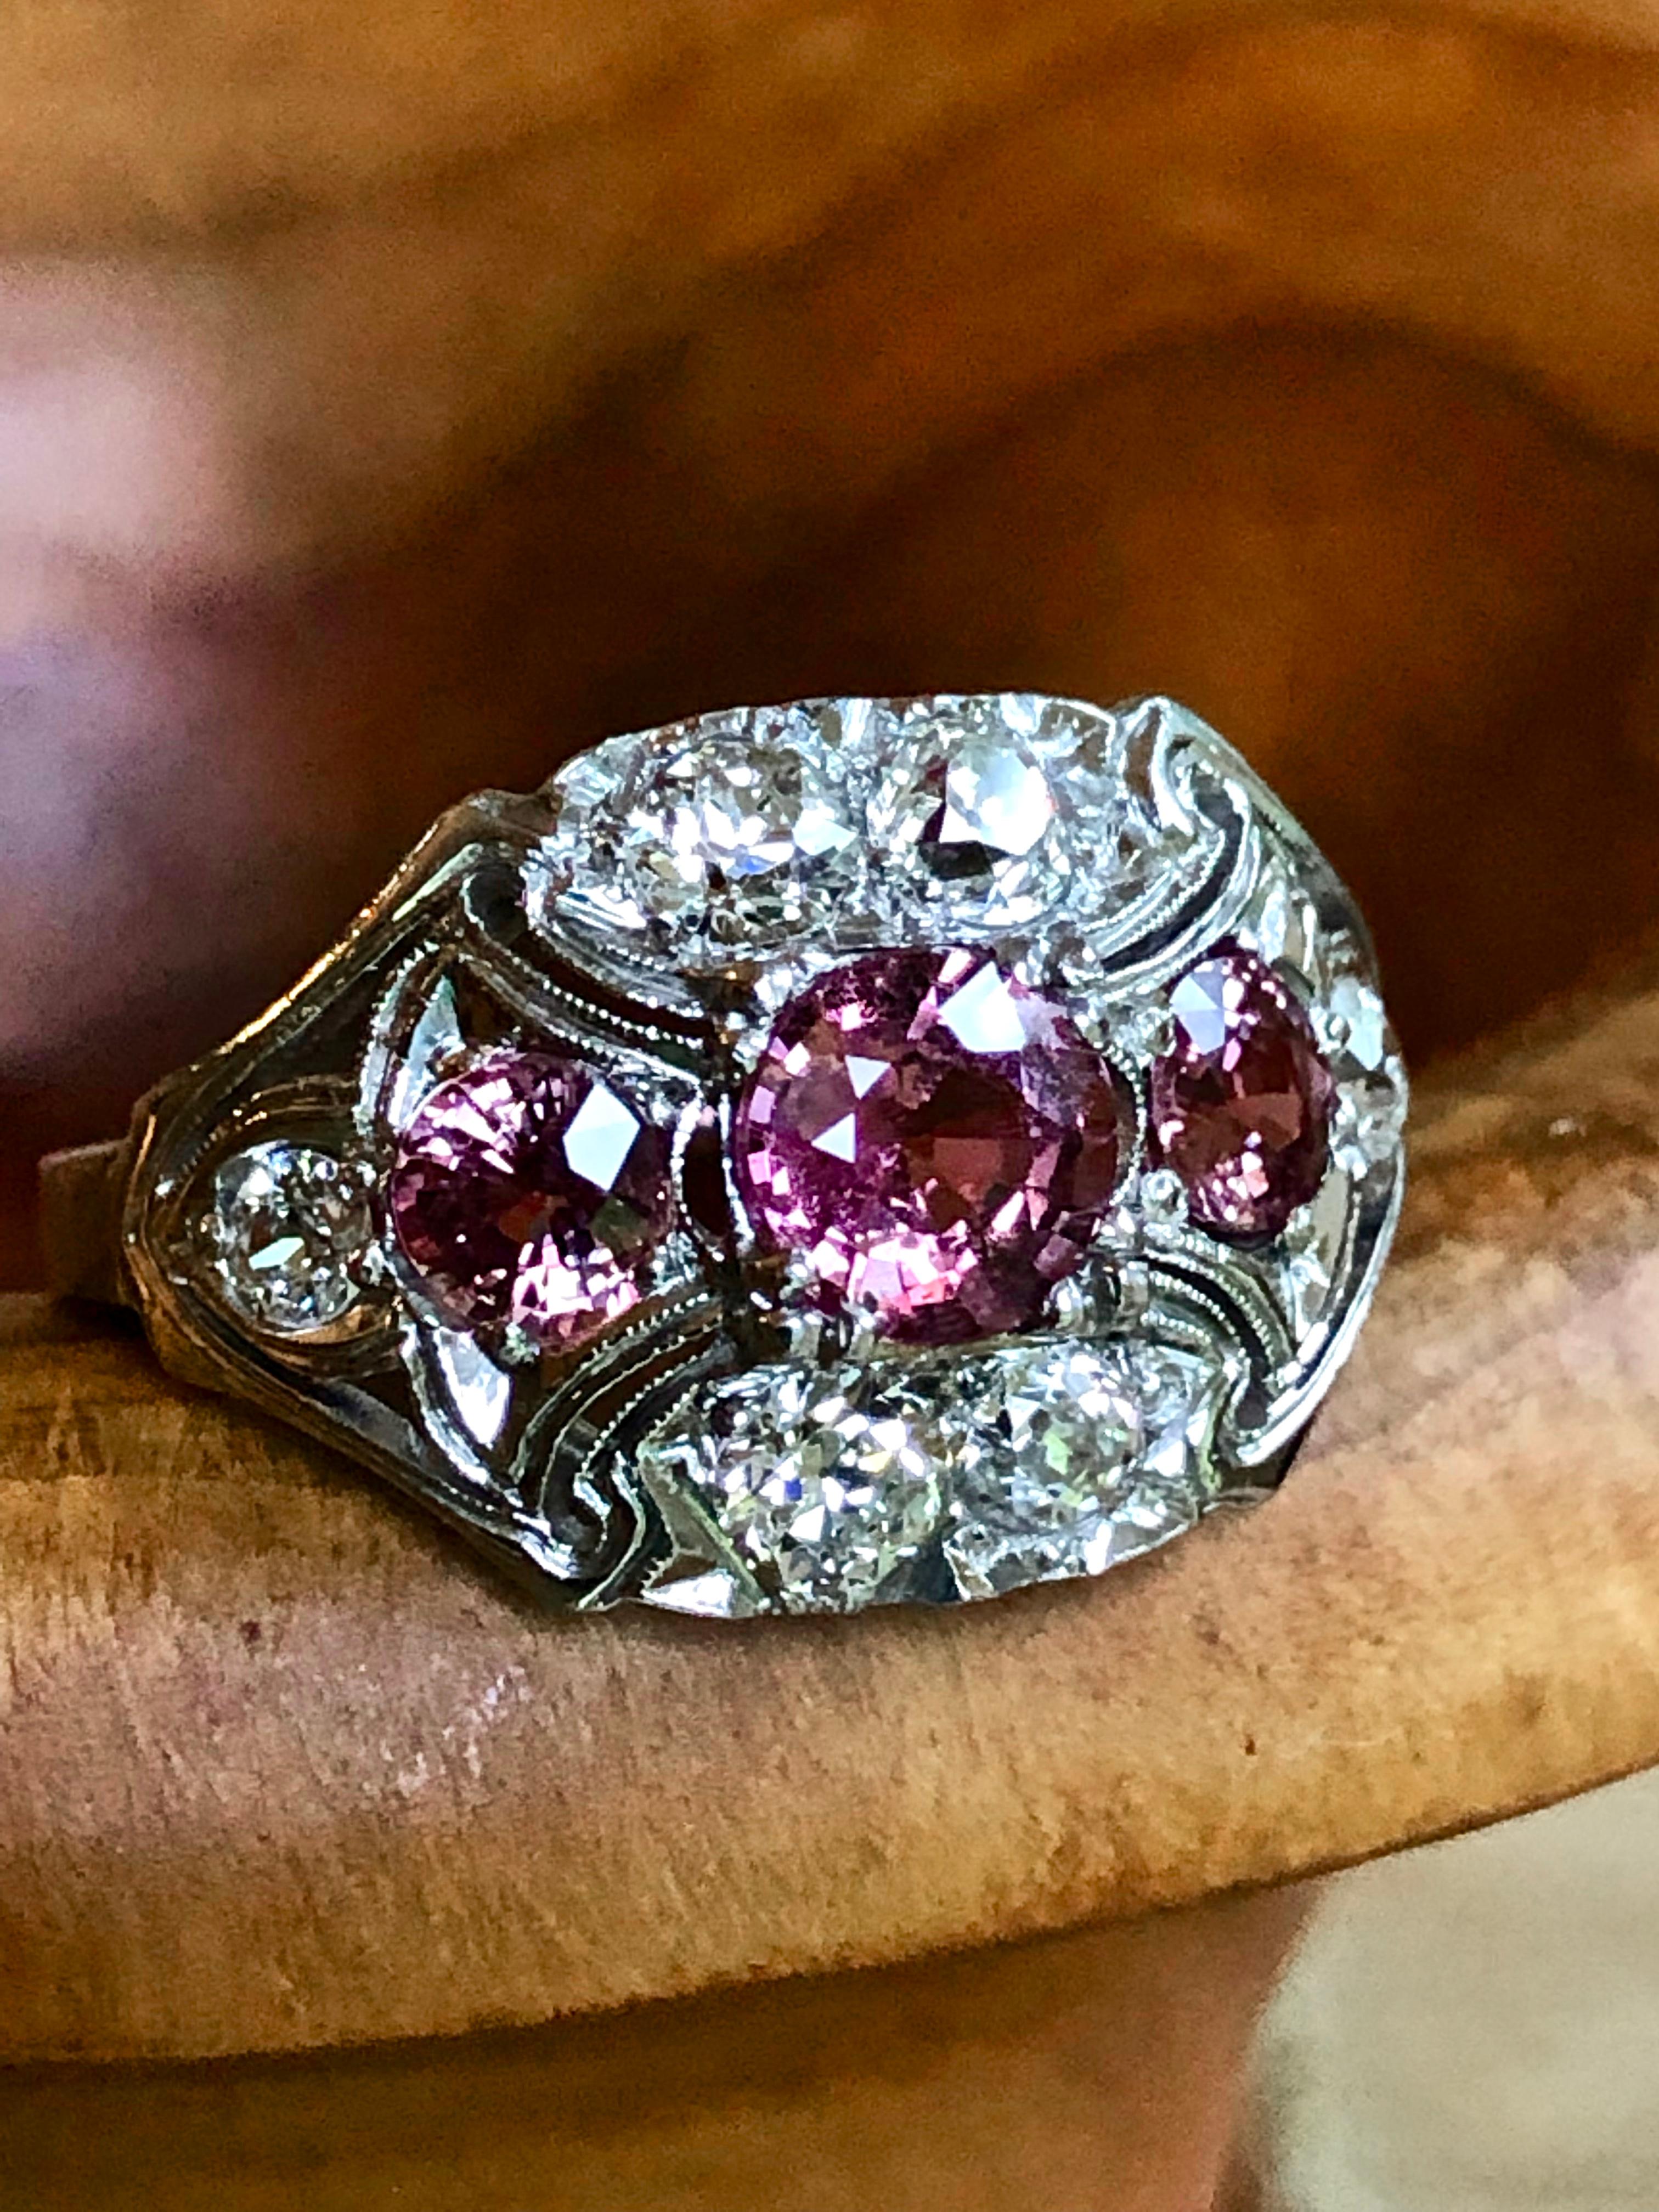 Stunning Antique Art Deco Sapphire Diamond Palladium Ring
Beautiful work and craftsmanship with exquisite detail throughout the gallery! one-of-a-kind. It holds three approximate 2.20ct natural sapphires and an approximate 0.90 old mine cut diamonds